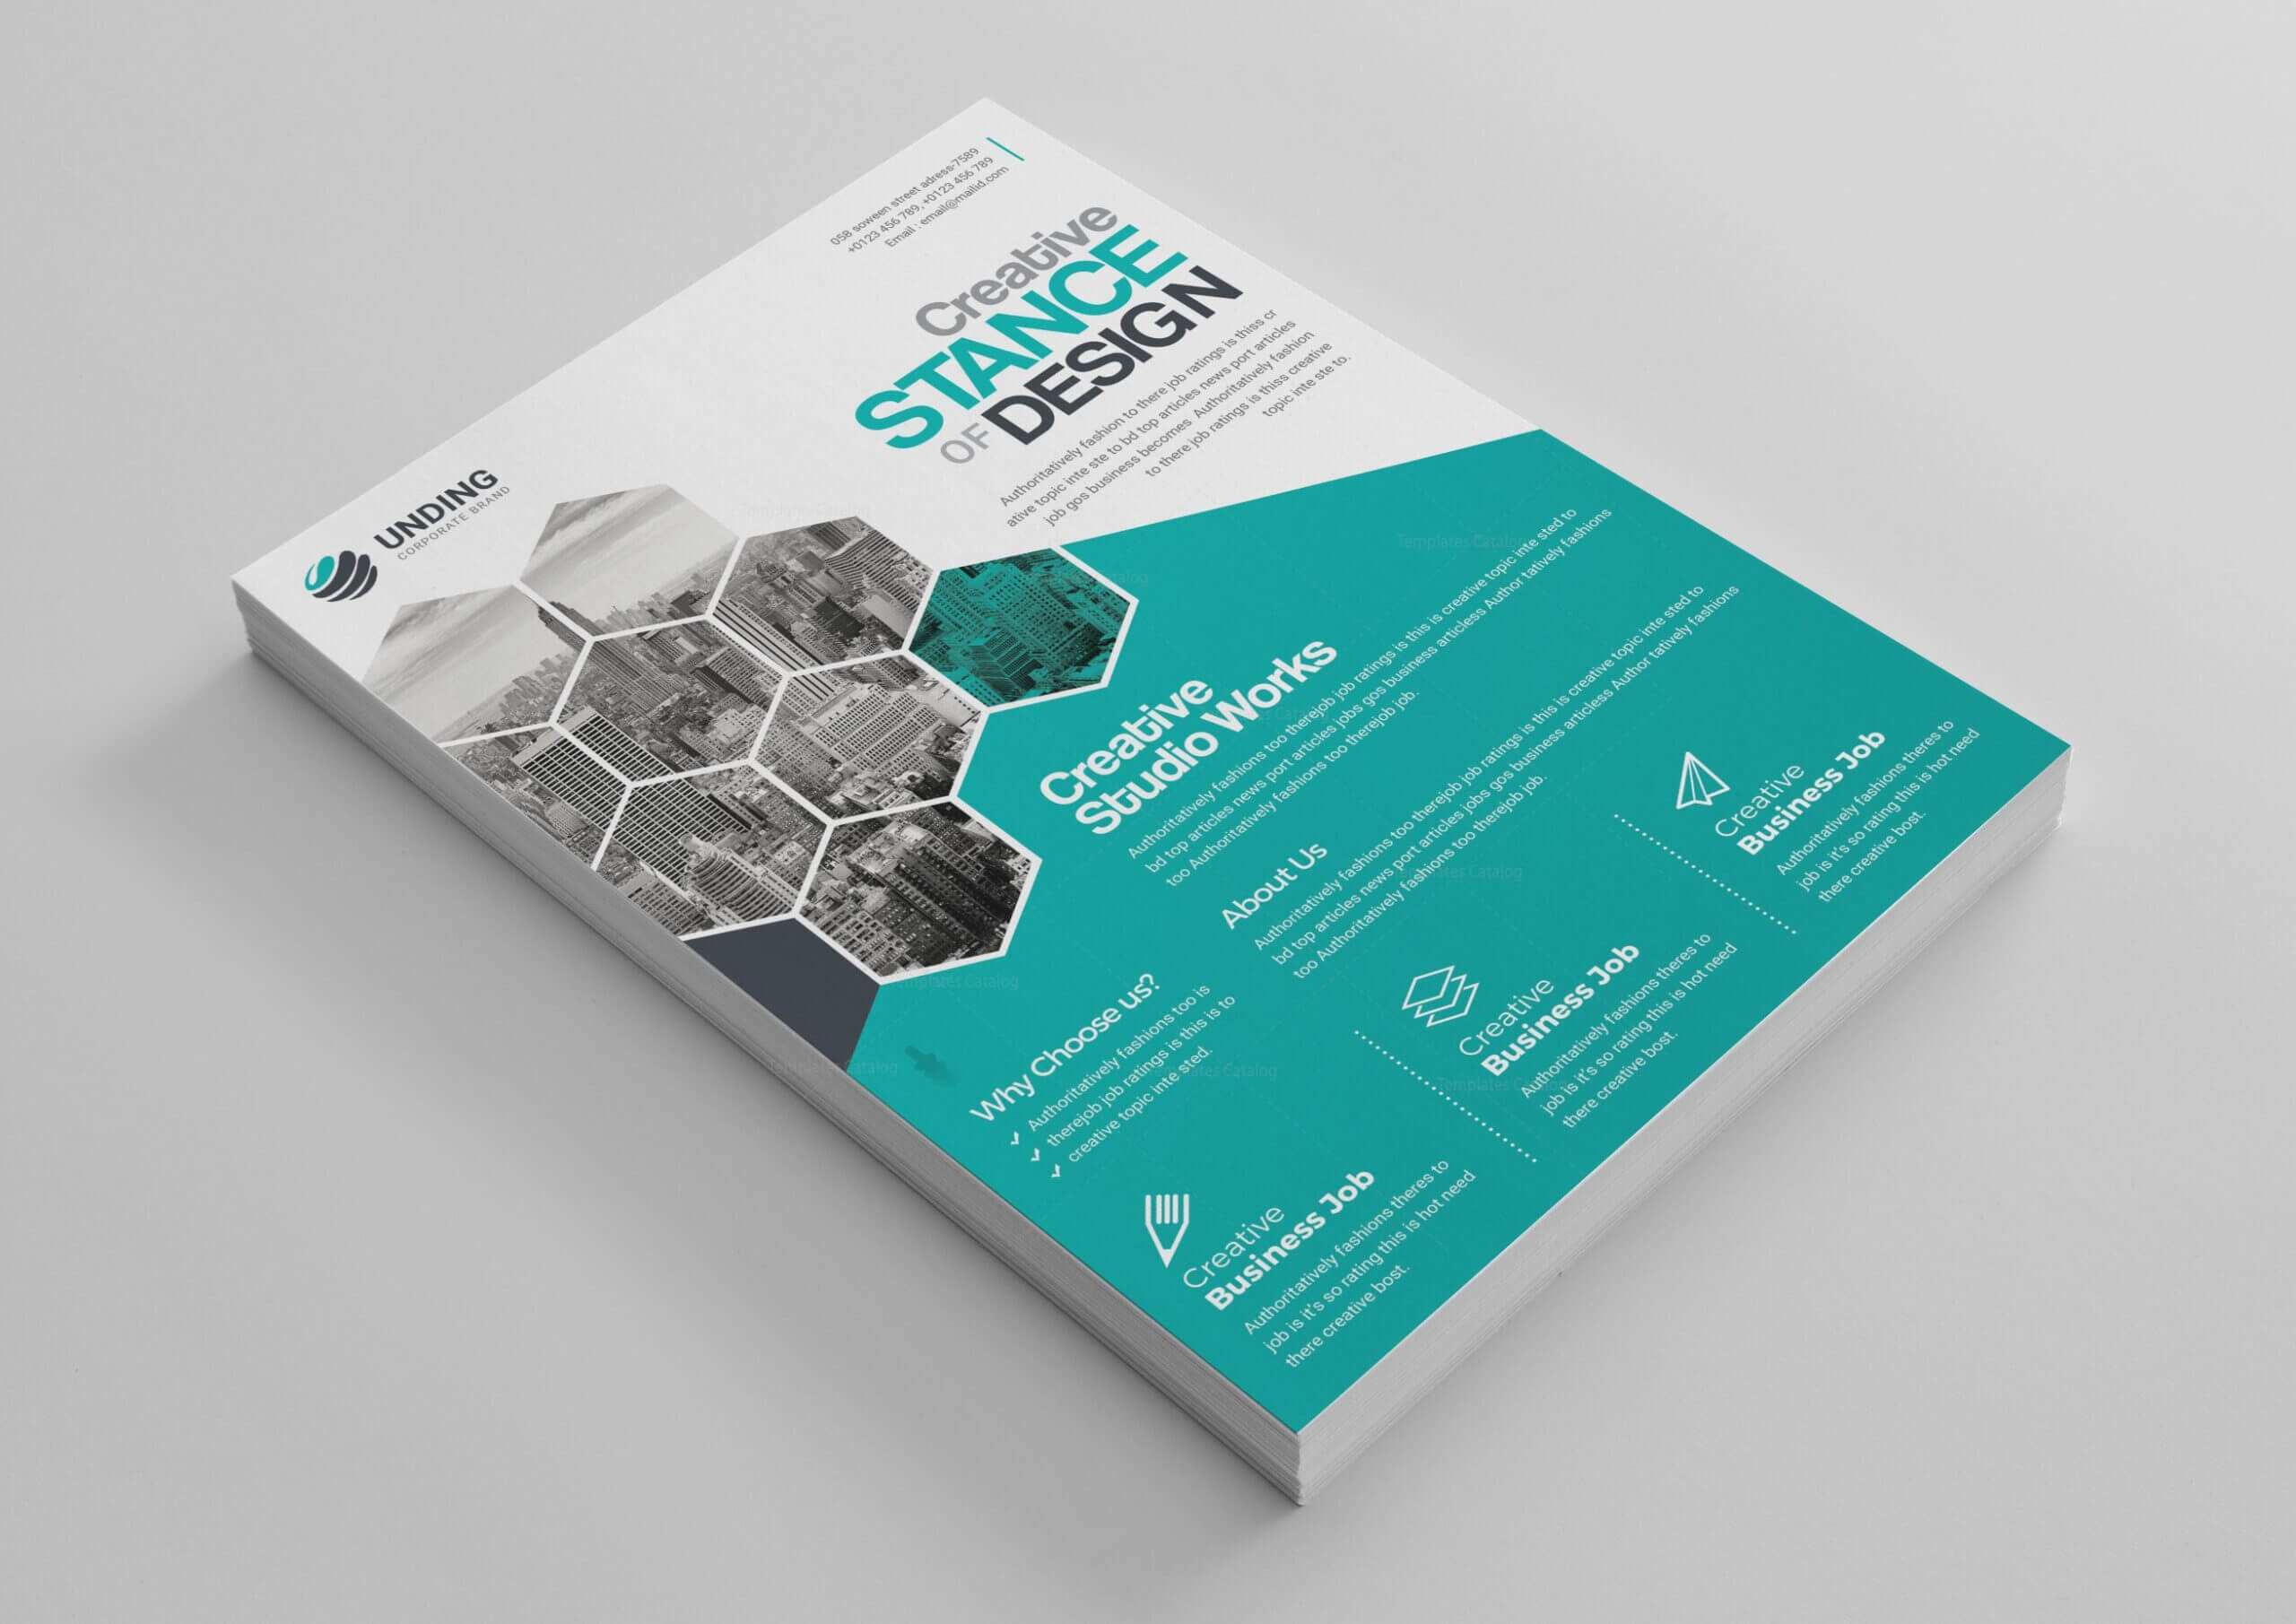 Stunning Professional Business Flyer Design Template 001520 Throughout Professional Brochure Design Templates